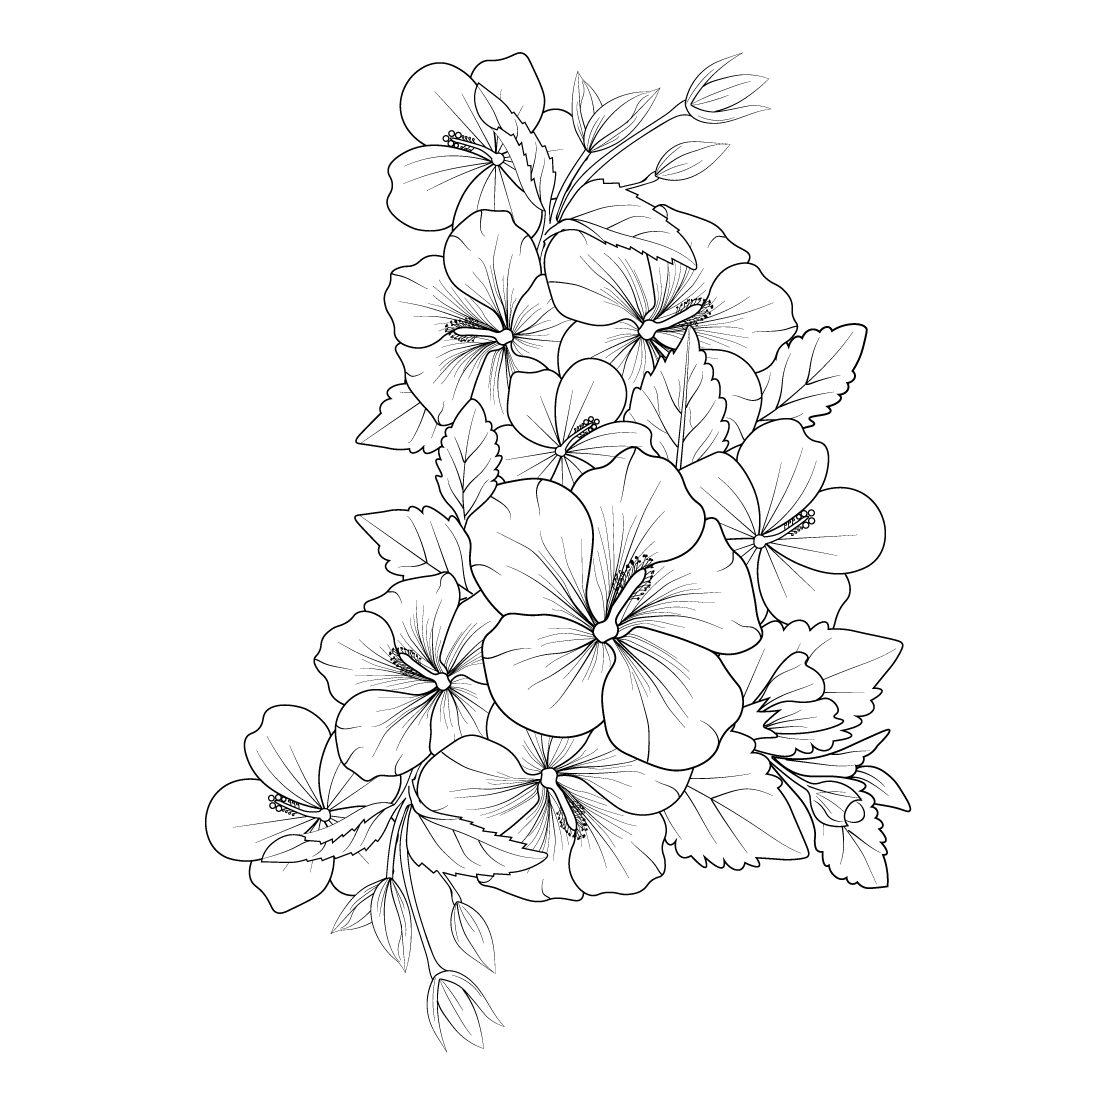 Hibiscus flower vector illustration of a beautiful flower bouquet, a hand-drawn artistic coloring book preview image.